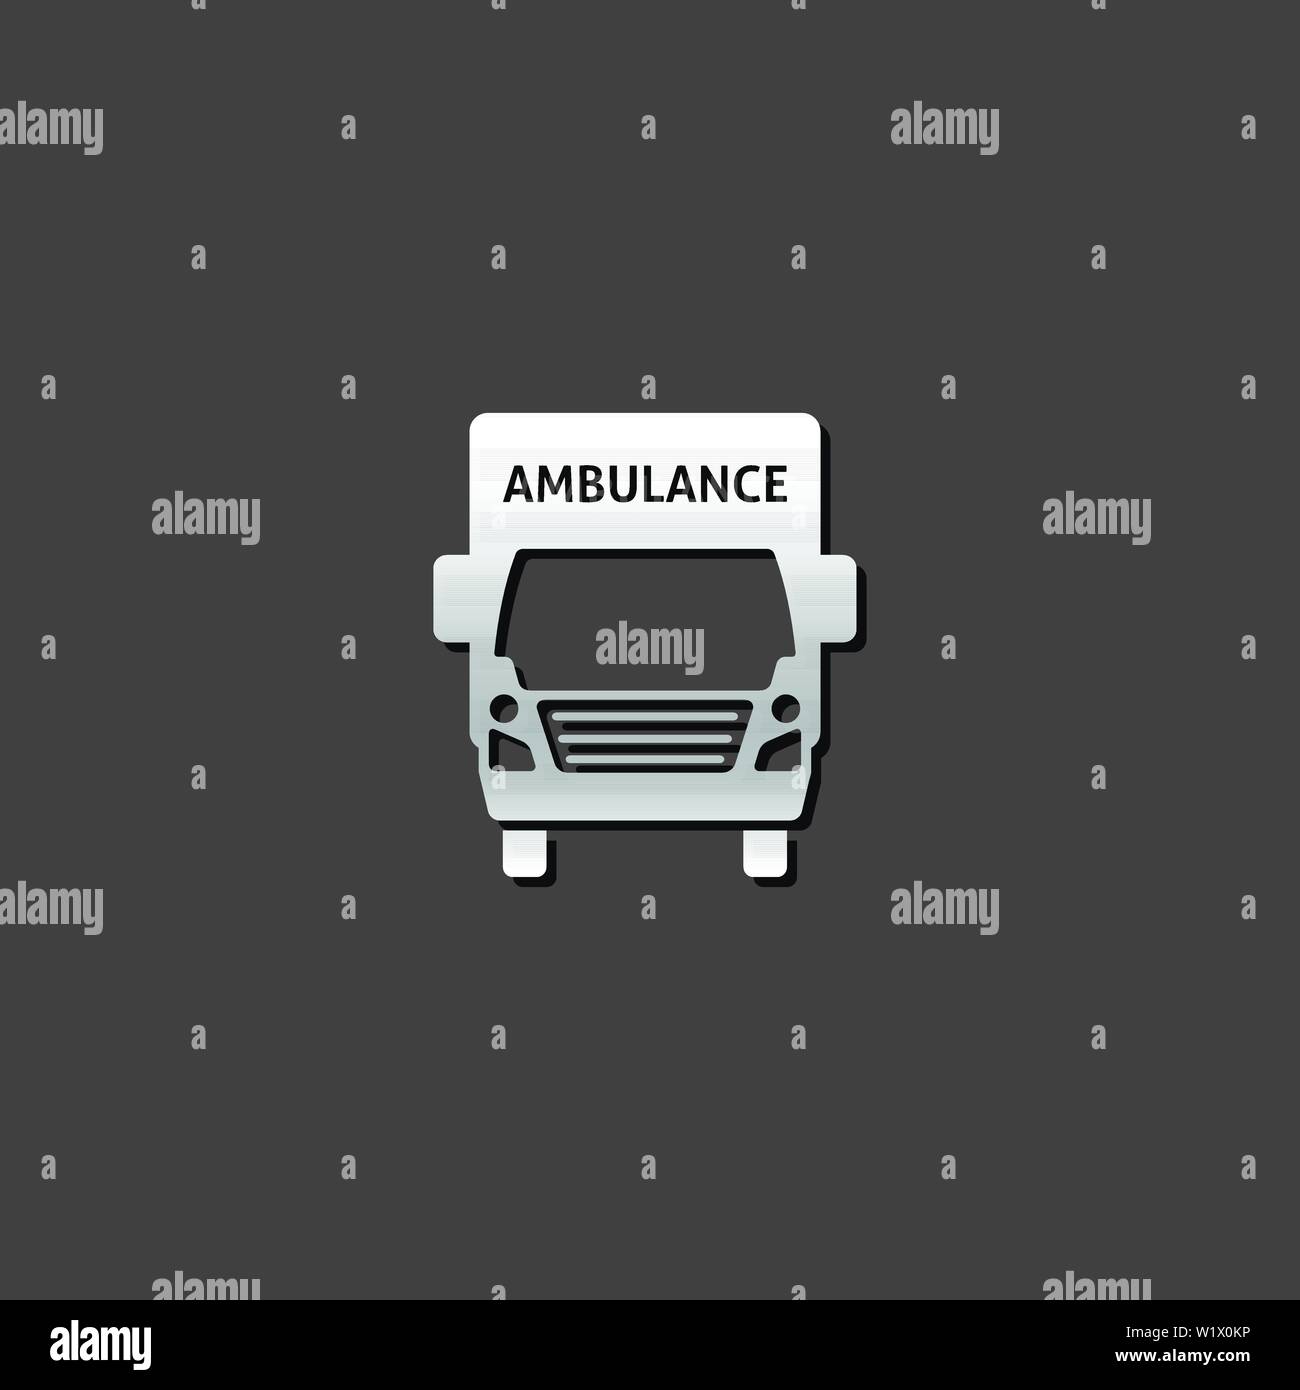 Ambulance icon in metallic grey color style. Medical help healthcare Stock Vector